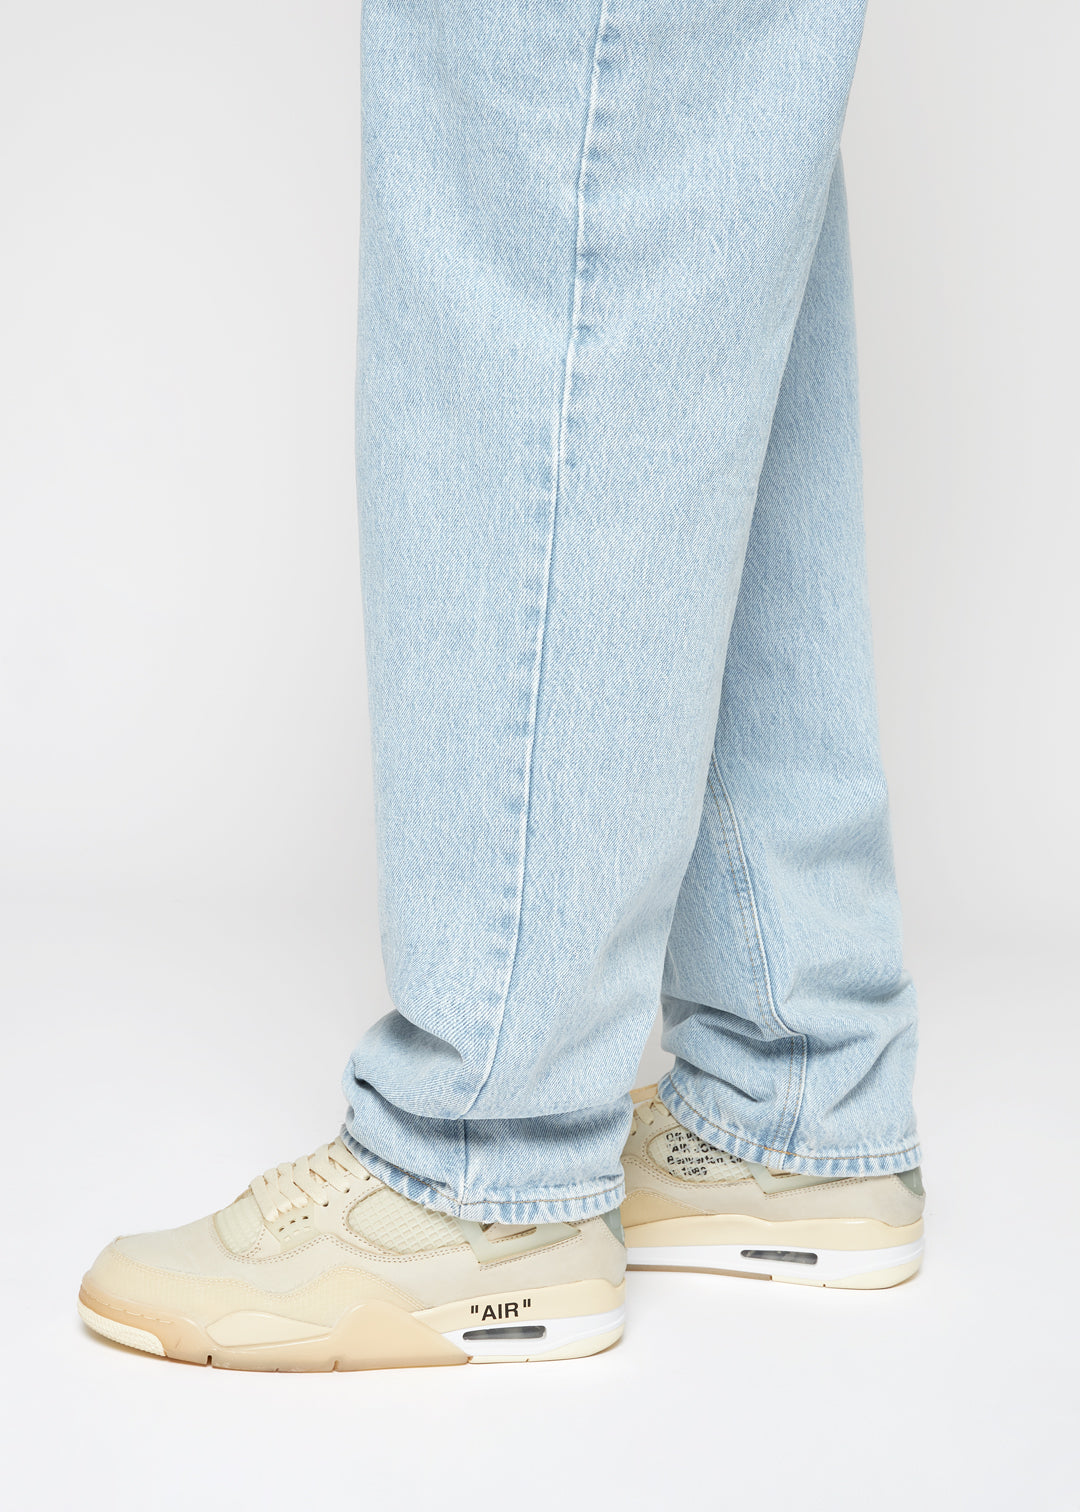 Basic Baggy Fit Jeans